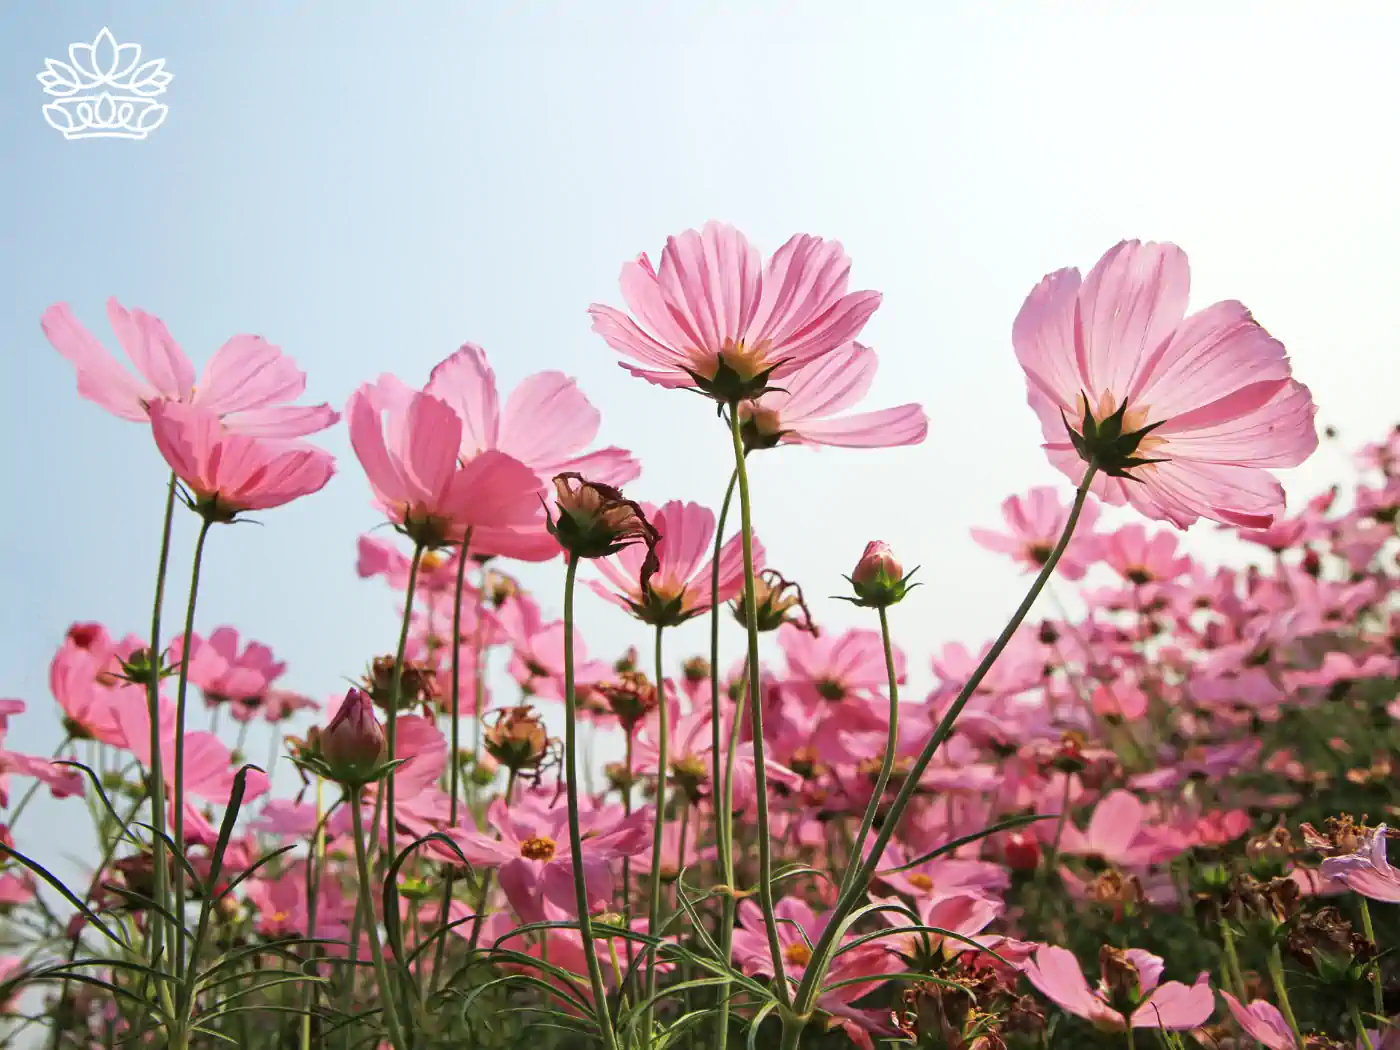 Delicate pink cosmos flowers blooming vibrantly under a soft blue sky, symbolizing gentle beauty and spring's fresh start. Fabulous Flowers and Gifts: Flower Arrangements Under R500, Delivered with Heart.